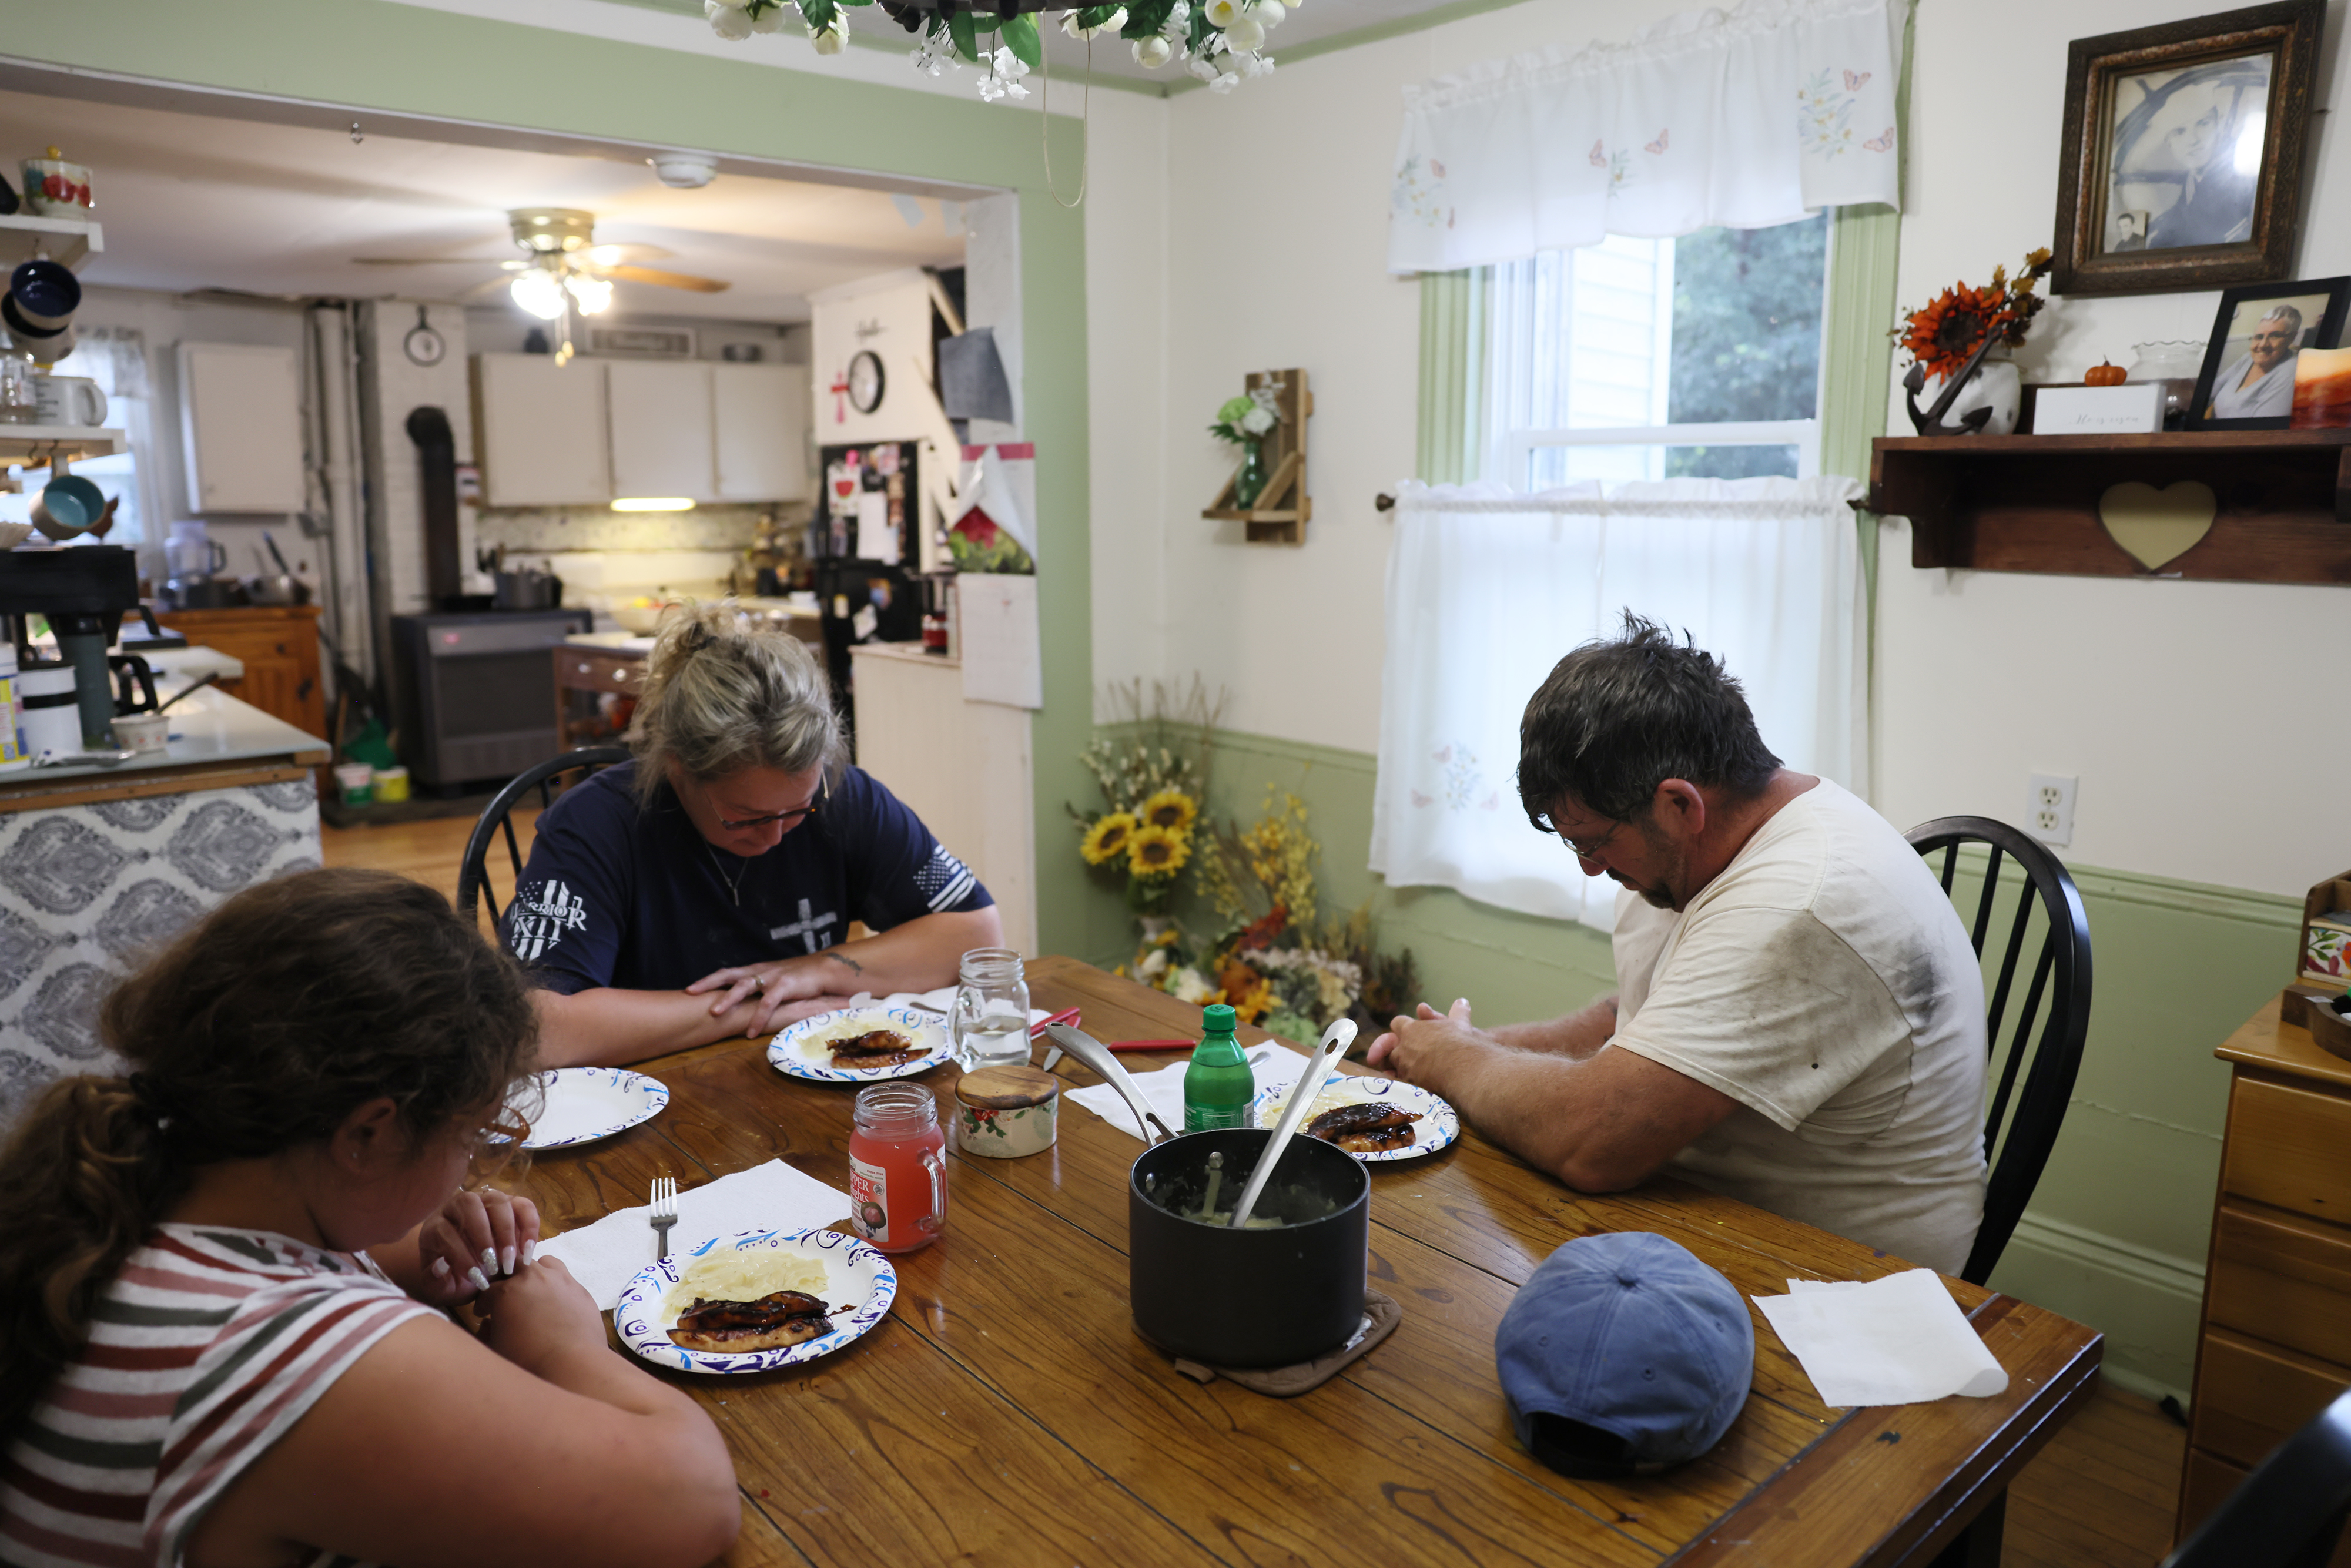 On the day the rules came out, Taza Watt sat at his kitchen table with his wife, Cathy, and granddaughter, Brooklyn, and prayed over the meal that Cathy and Brooklyn had prepared on Aug 31. “Father, we are so thankful for your many blessings, for this food and for this family. Father, we pray for our island and the boys of Vinalhaven as we face changes that will make it hard on our fishermen to provide for their families. We ask that you give our boys the strength to make it through this, we also pray for the people in Louisiana and Afghanistan. We love you Lord and ask these things in Jesus’ name, amen.”   
